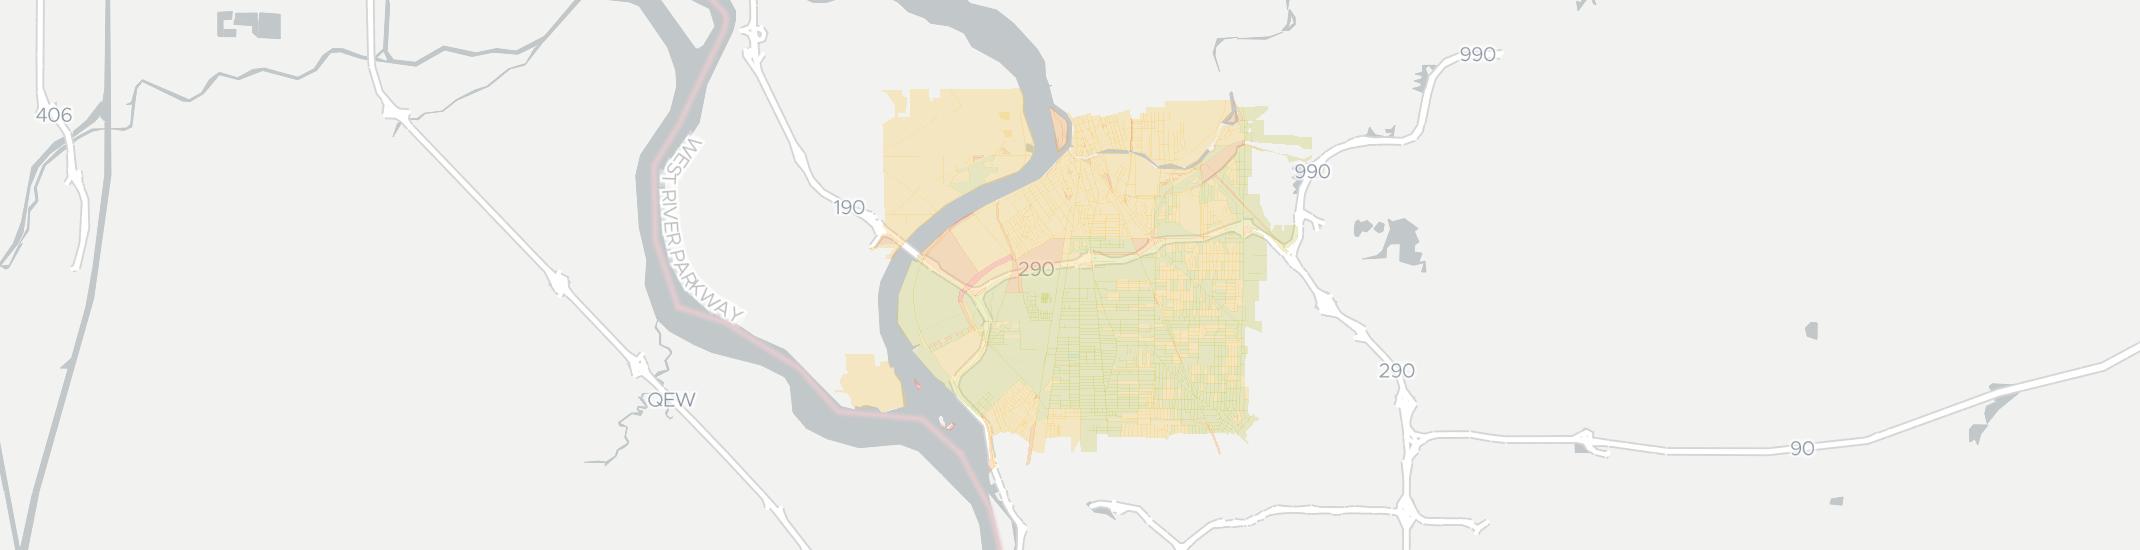 Tonawanda Internet Competition Map. Click for interactive map.